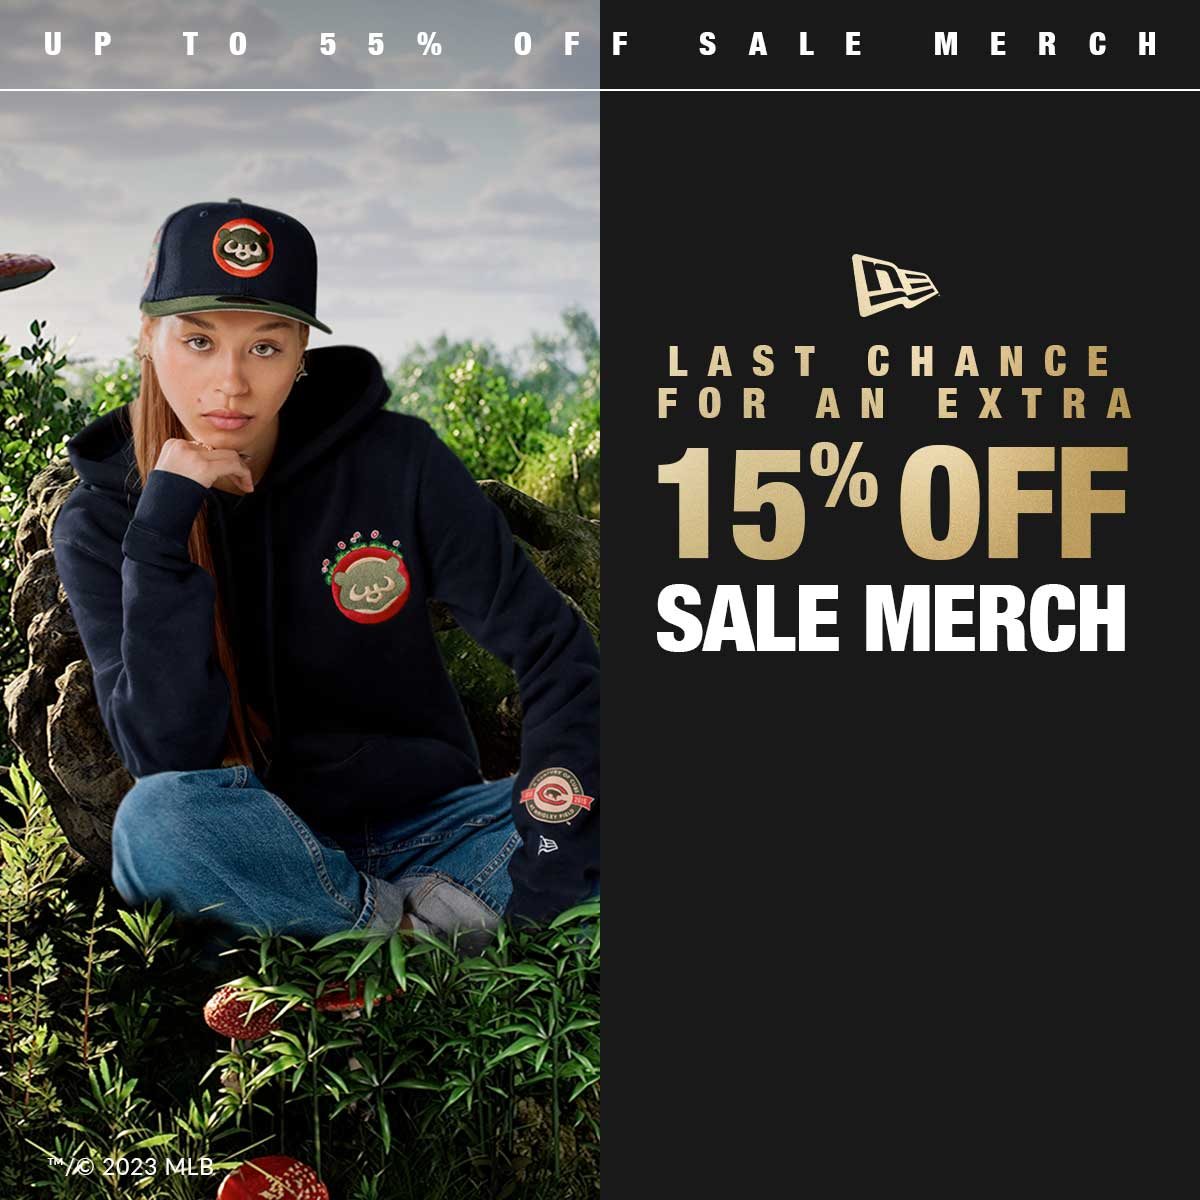 Last Chance for an extra 15% off sale merch